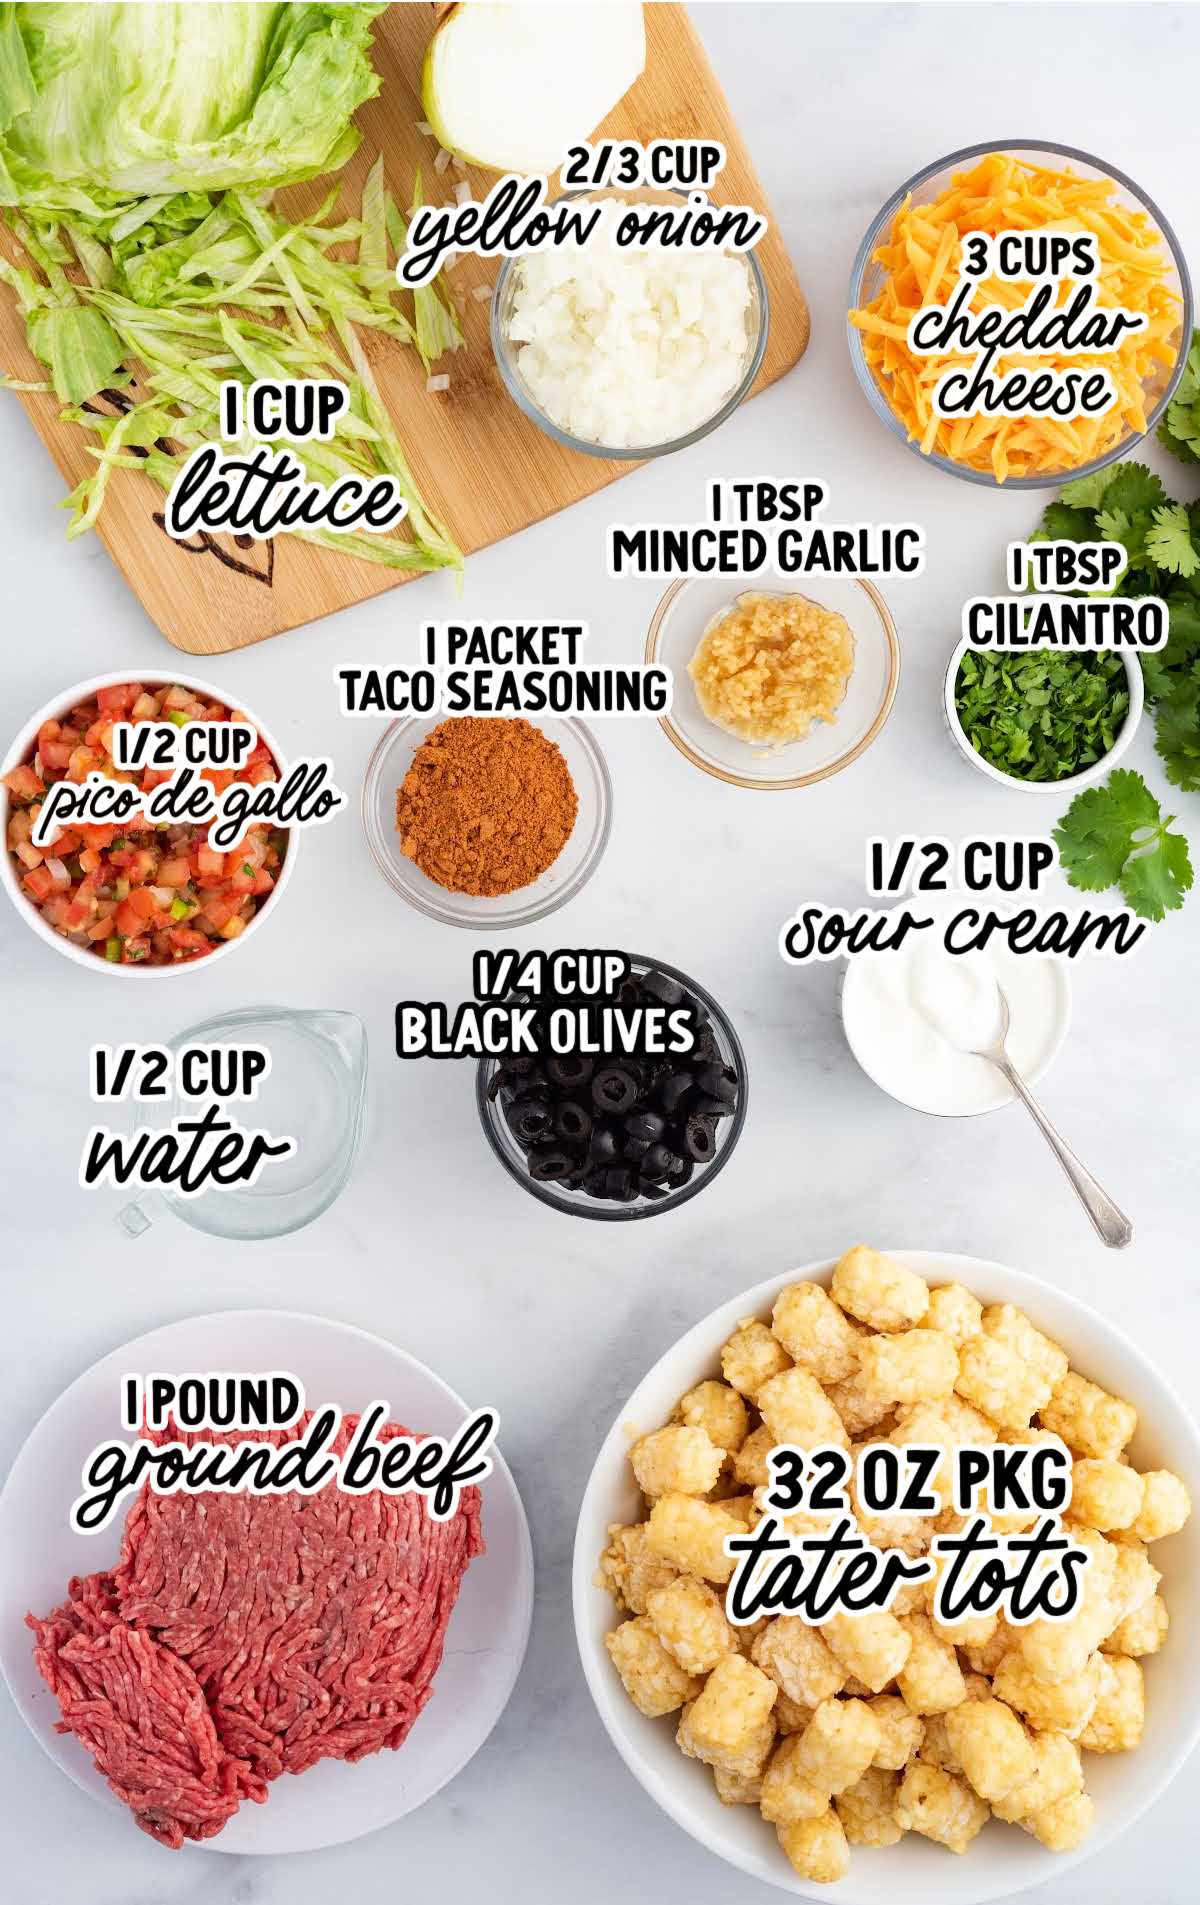 Tater Tot Nachos raw ingredients that are labeled